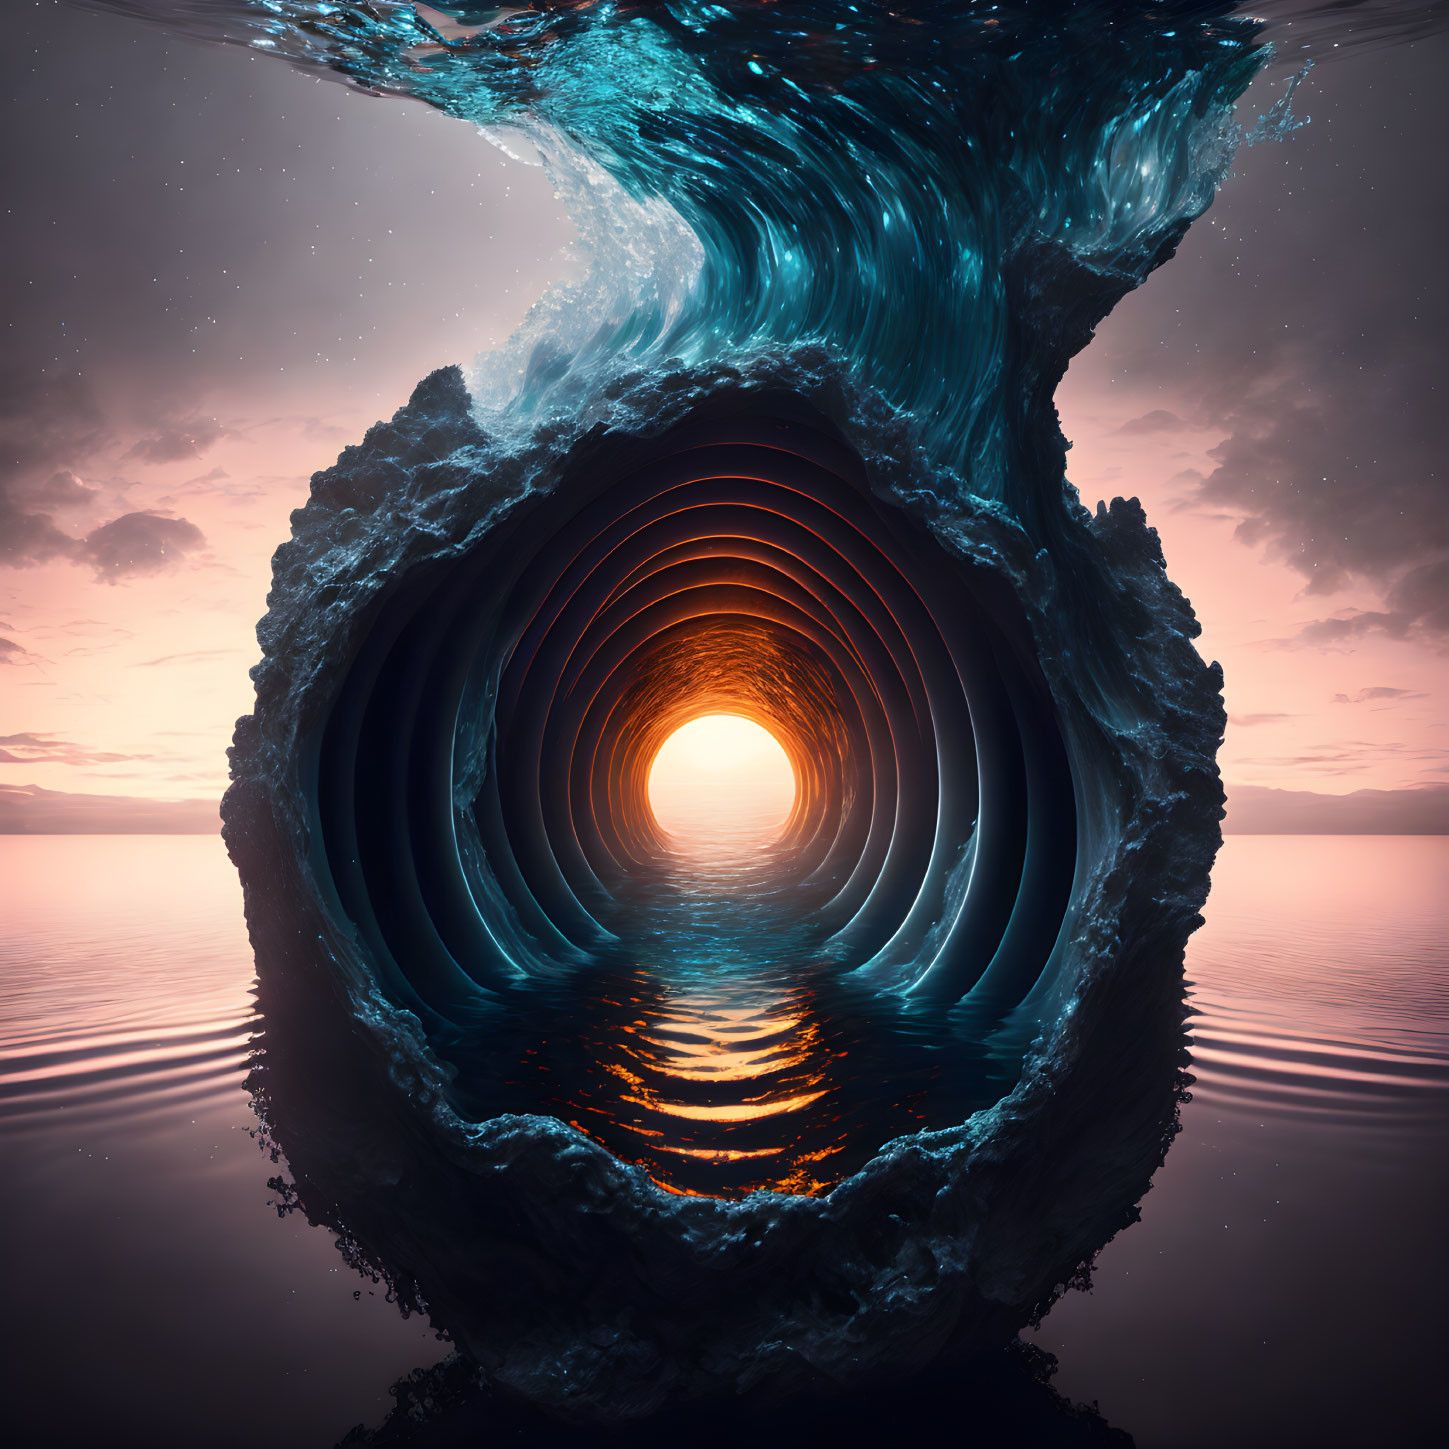 Surreal cylindrical tunnel with swirling ocean waves and bright sunset reflection